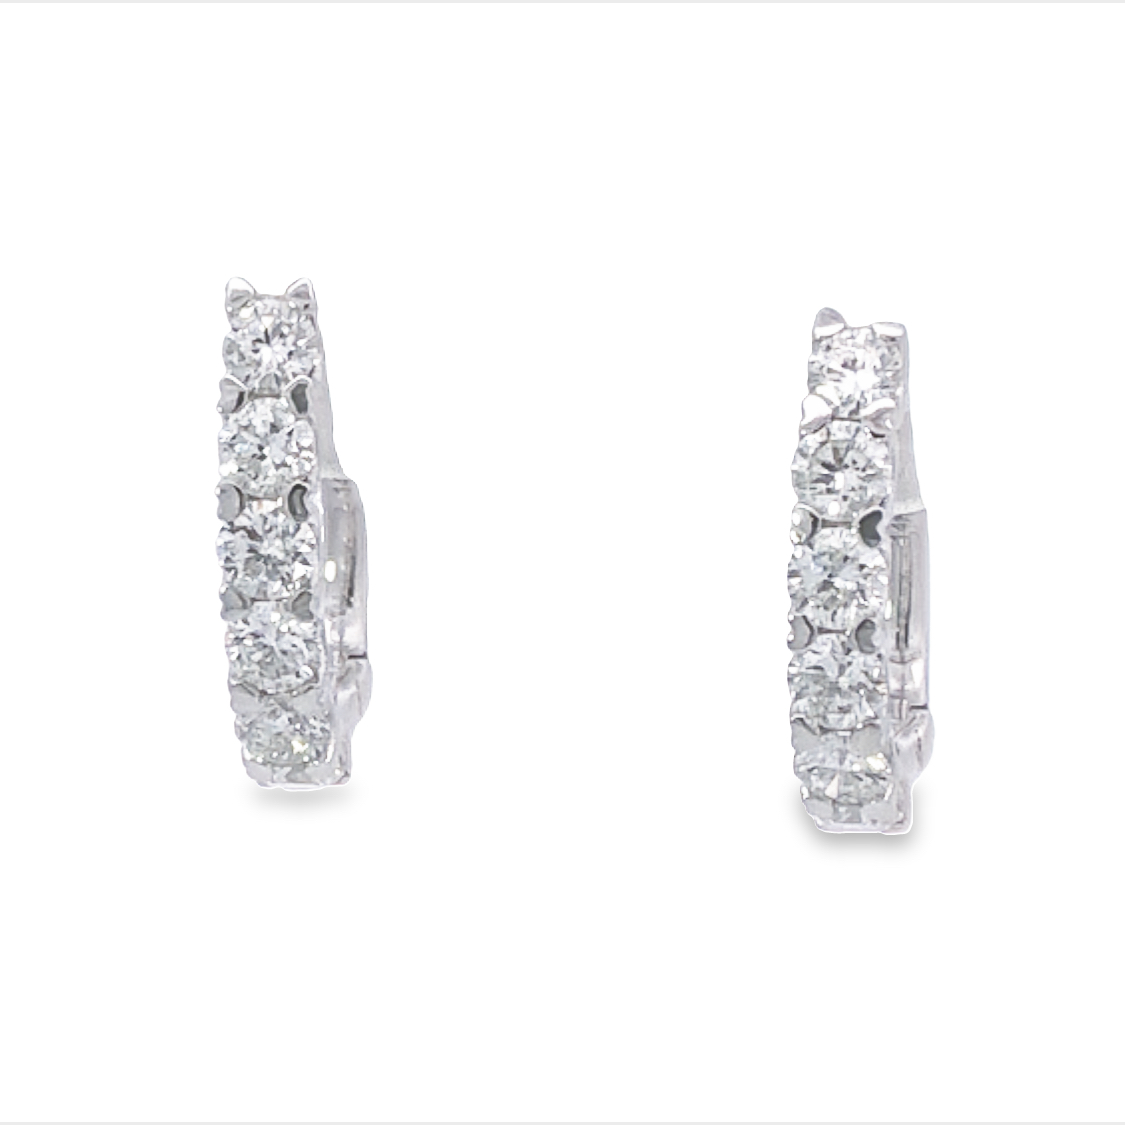 14K White Gold Hoop Earrings with 12 Round Diamonds 1.04 Tcw G-H SI1